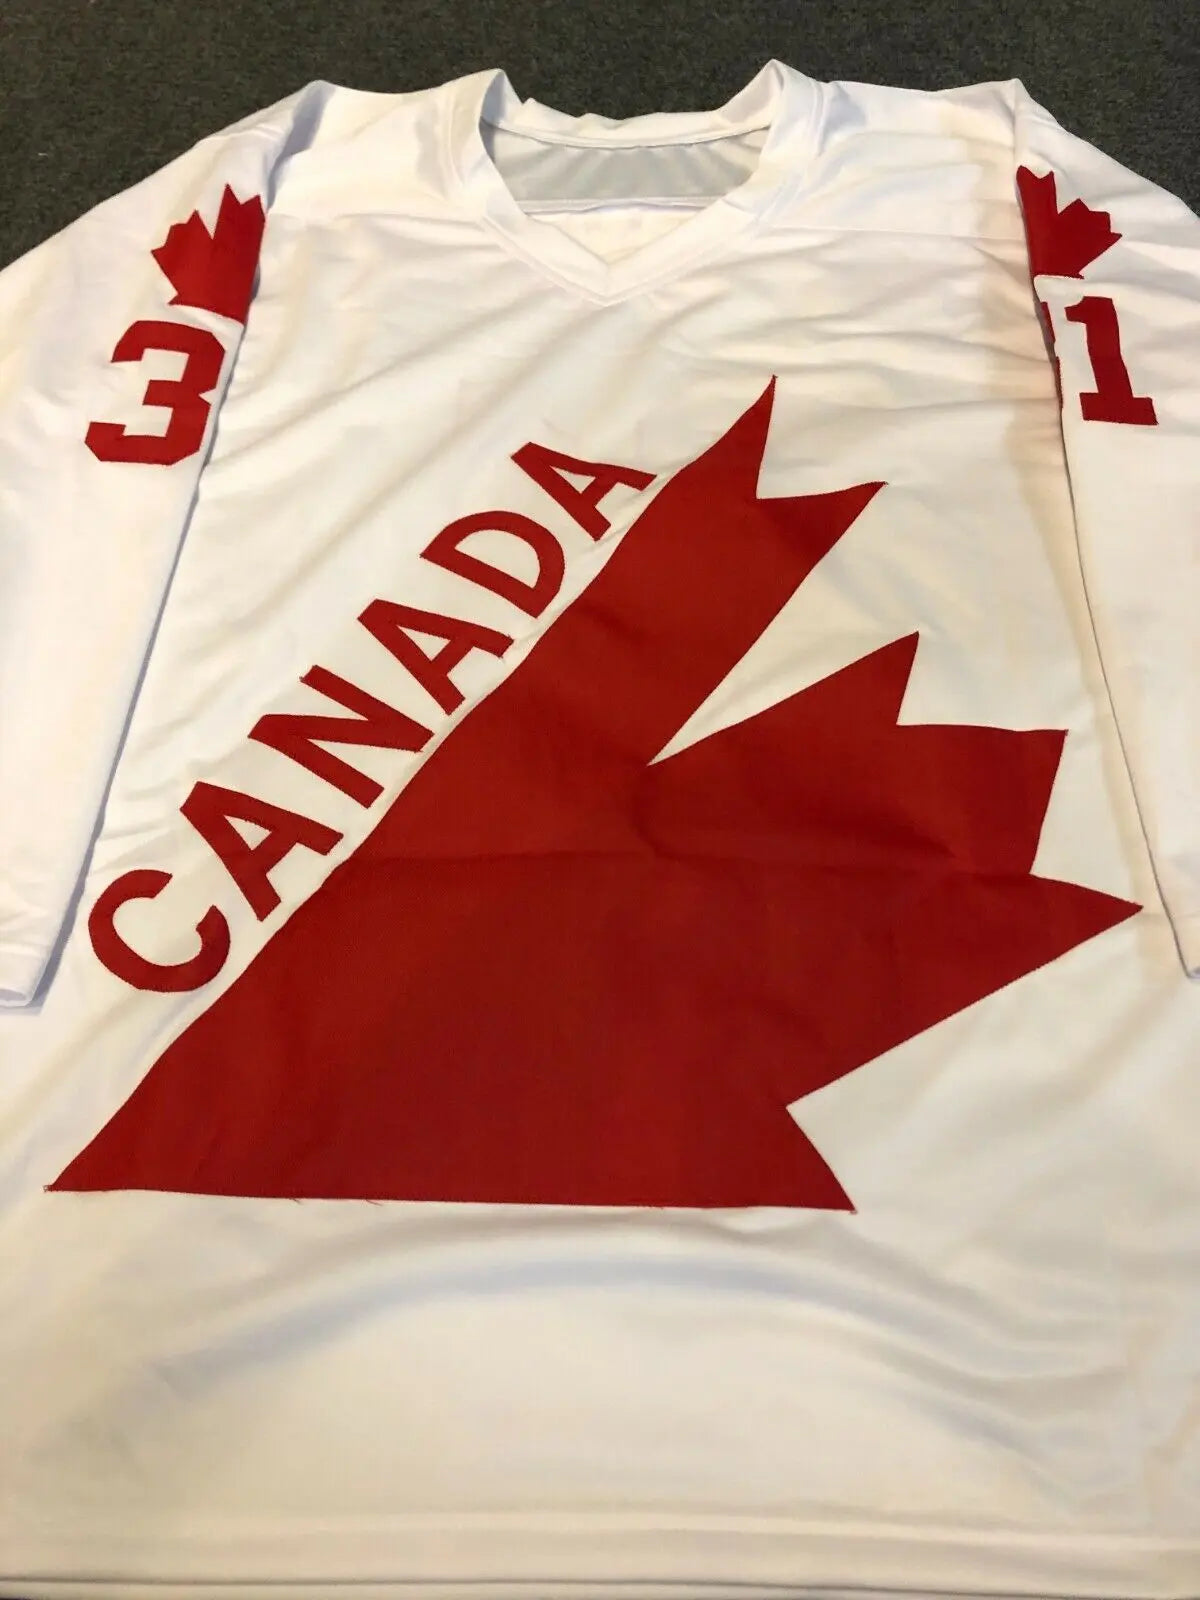 MVP Authentics Gerry Cheevers Autographed Signed Inscribed Canada Jersey Jsa Coa 143.10 sports jersey framing , jersey framing